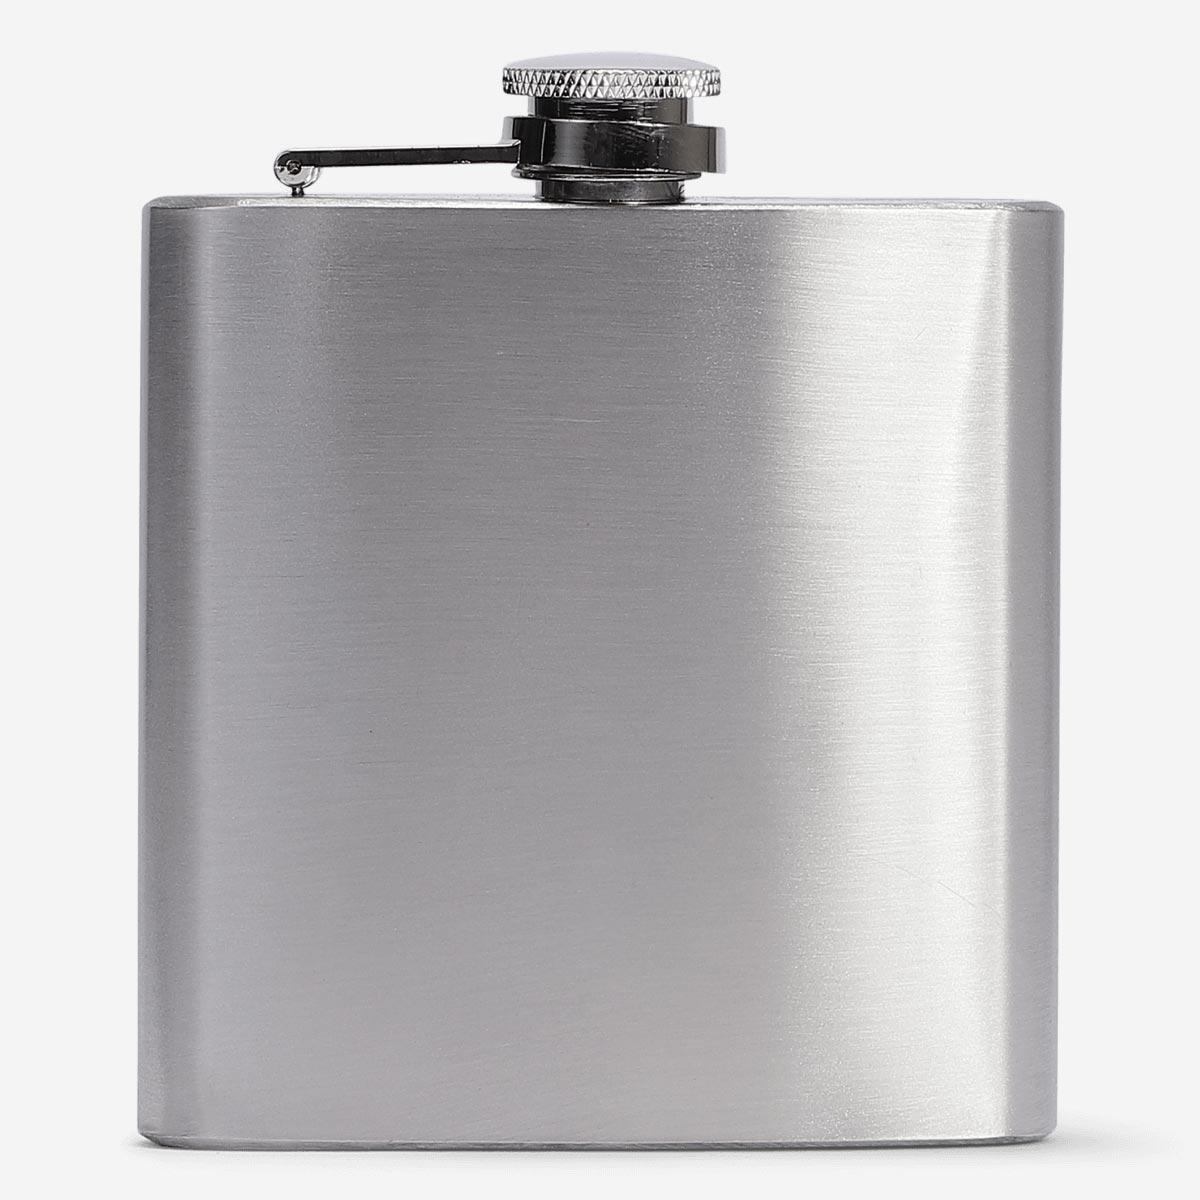 Silver stainless steel hip flask